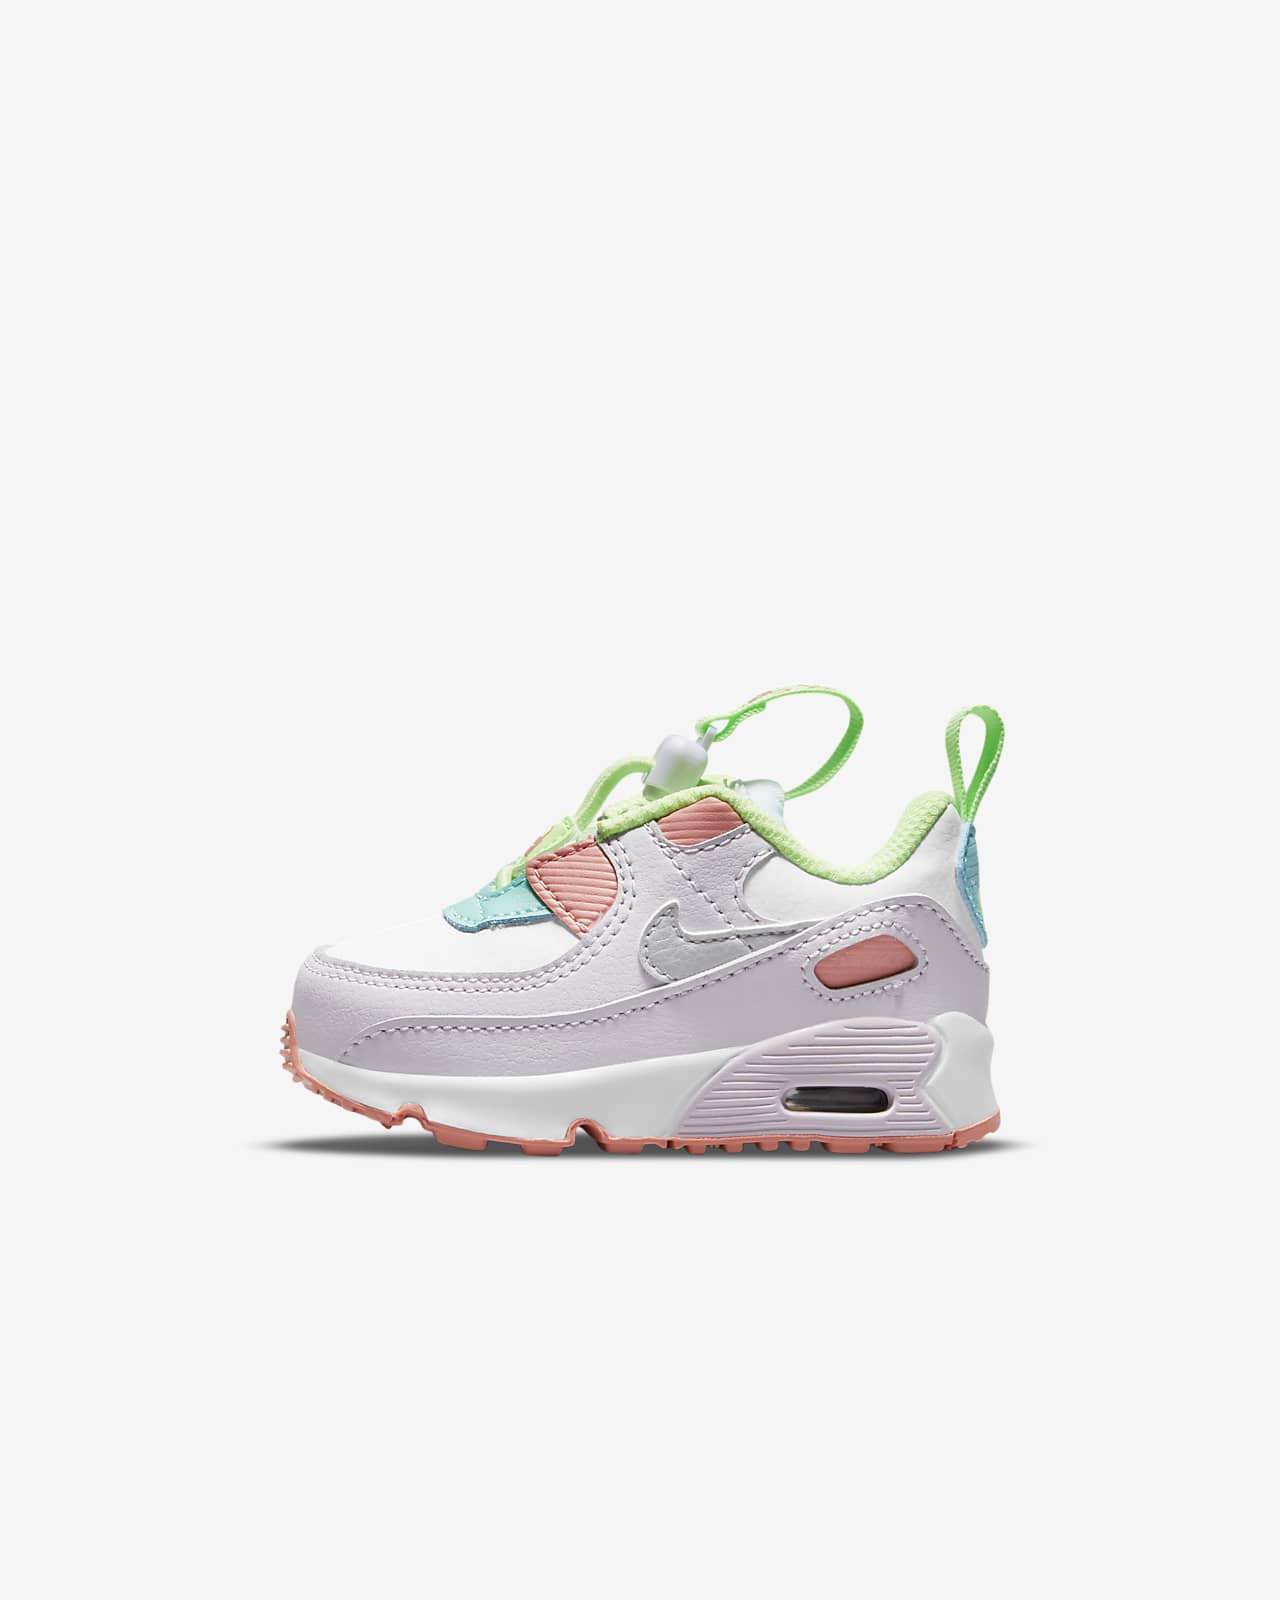 Nike Max 90 Baby/Toddler Shoes. ID